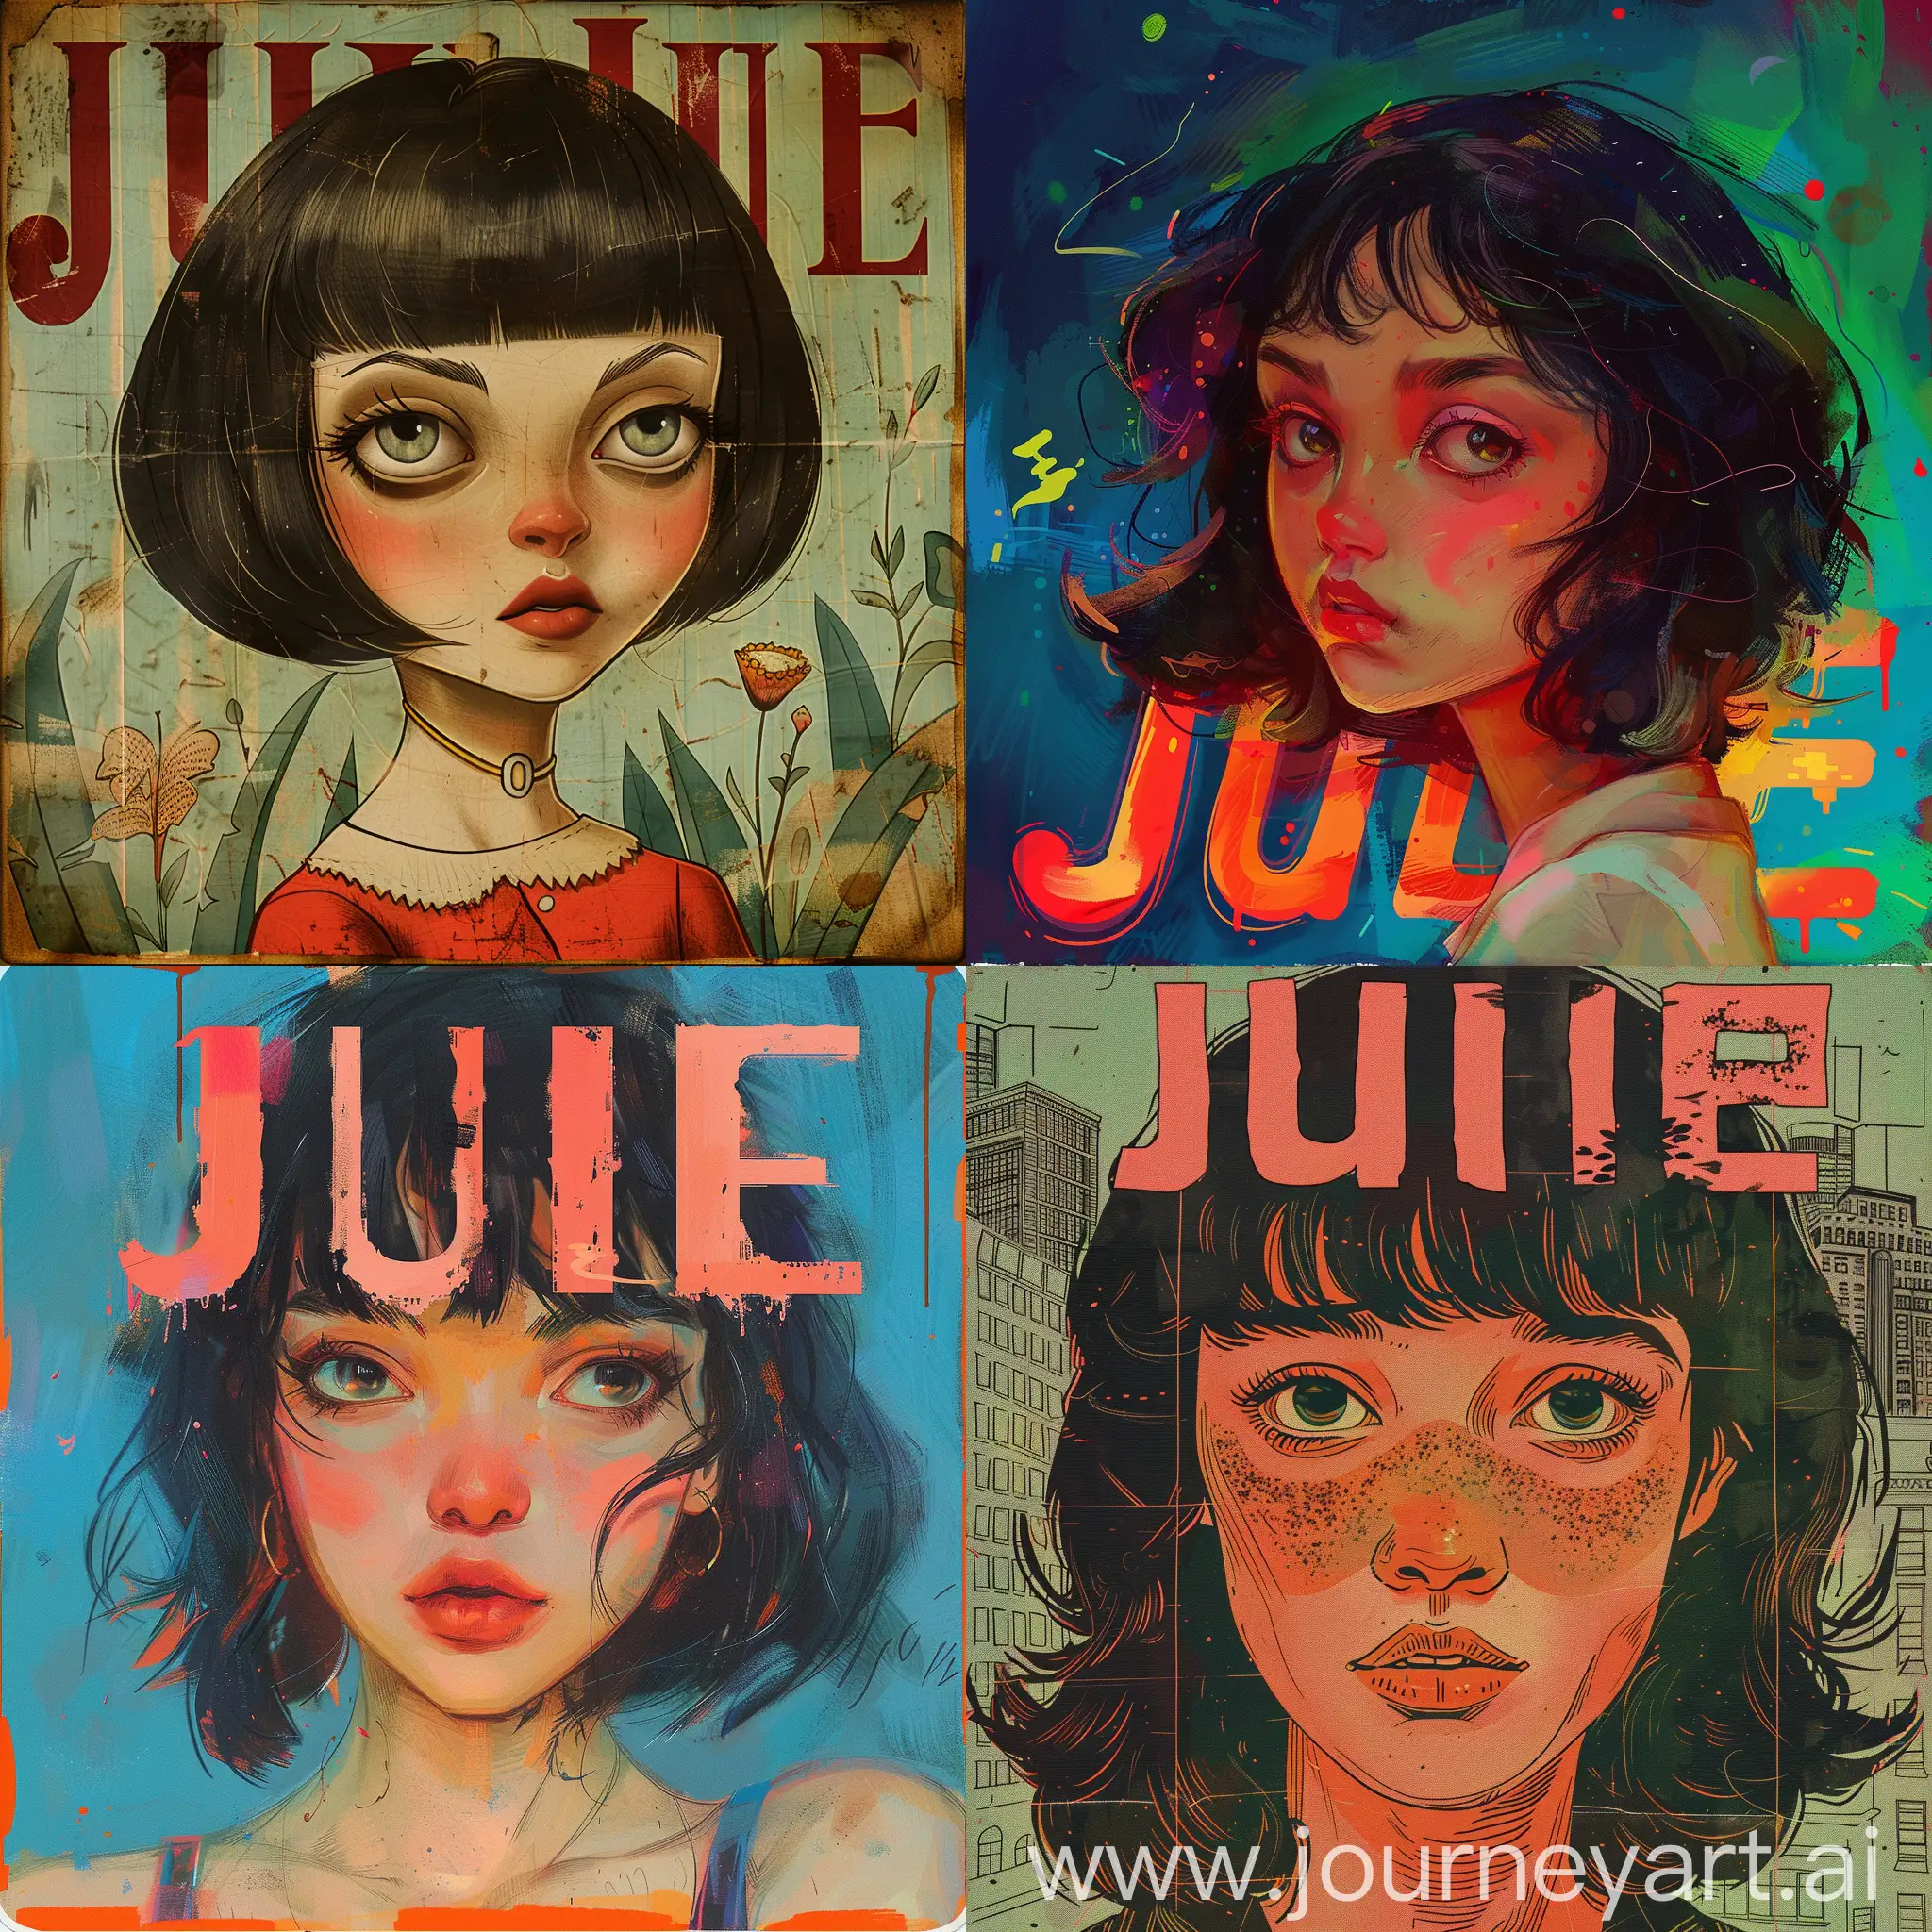 Character with the artstyle of the band "Julie" Albumcovers